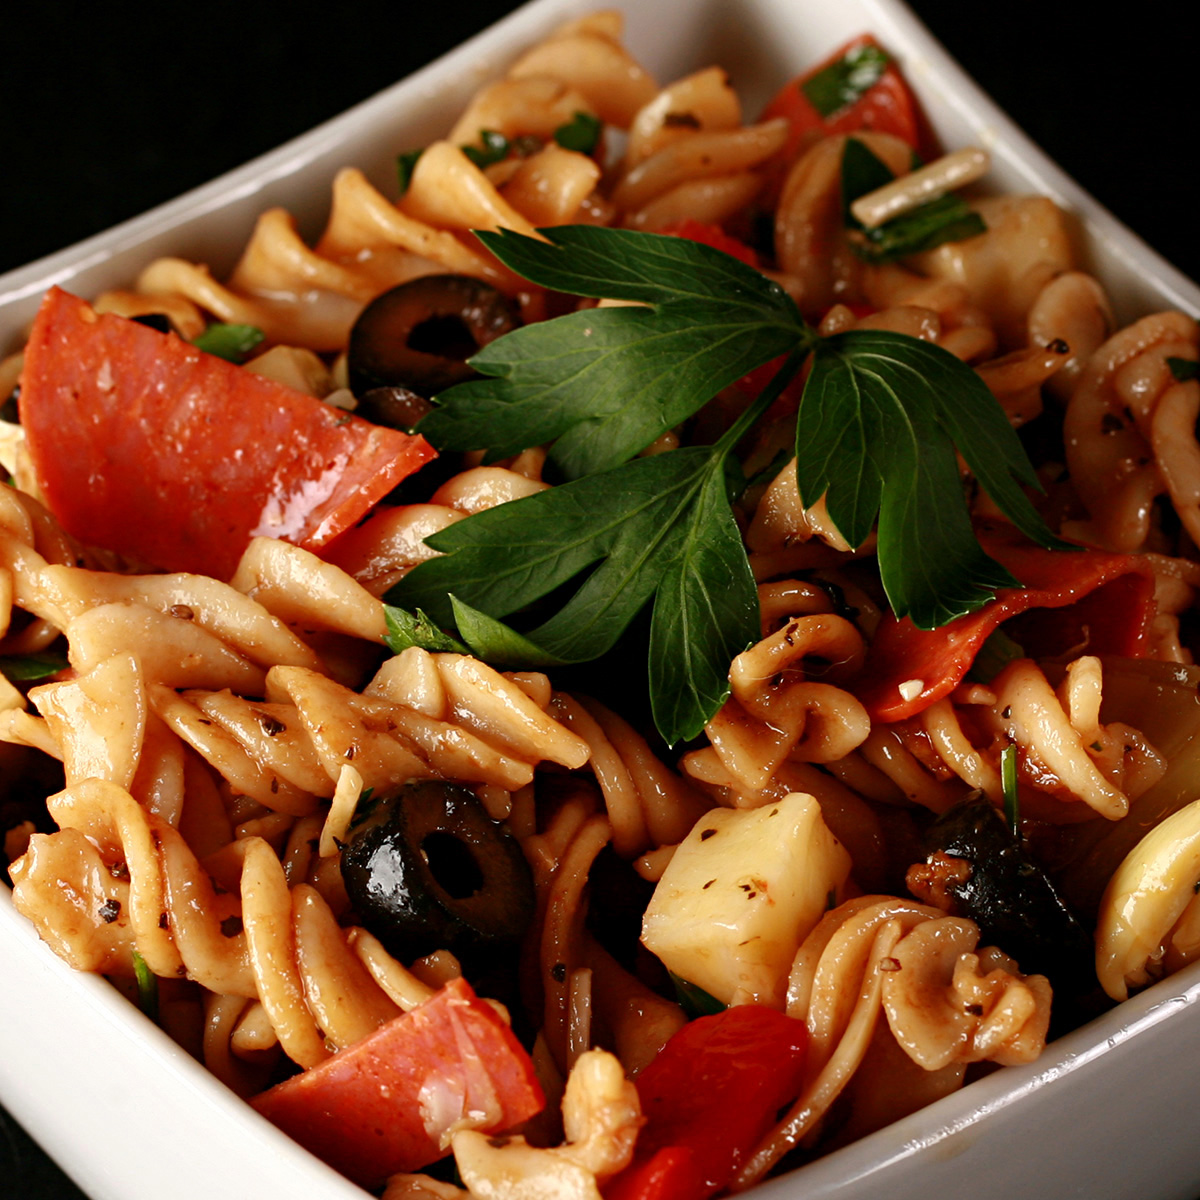 A bowl of gluten free pasta salad in a white bowl. Spiral noodles are shown lightly coated in a thin red sauce, with pepperoni, artichokes, black olives, cheese, and parsley visible.